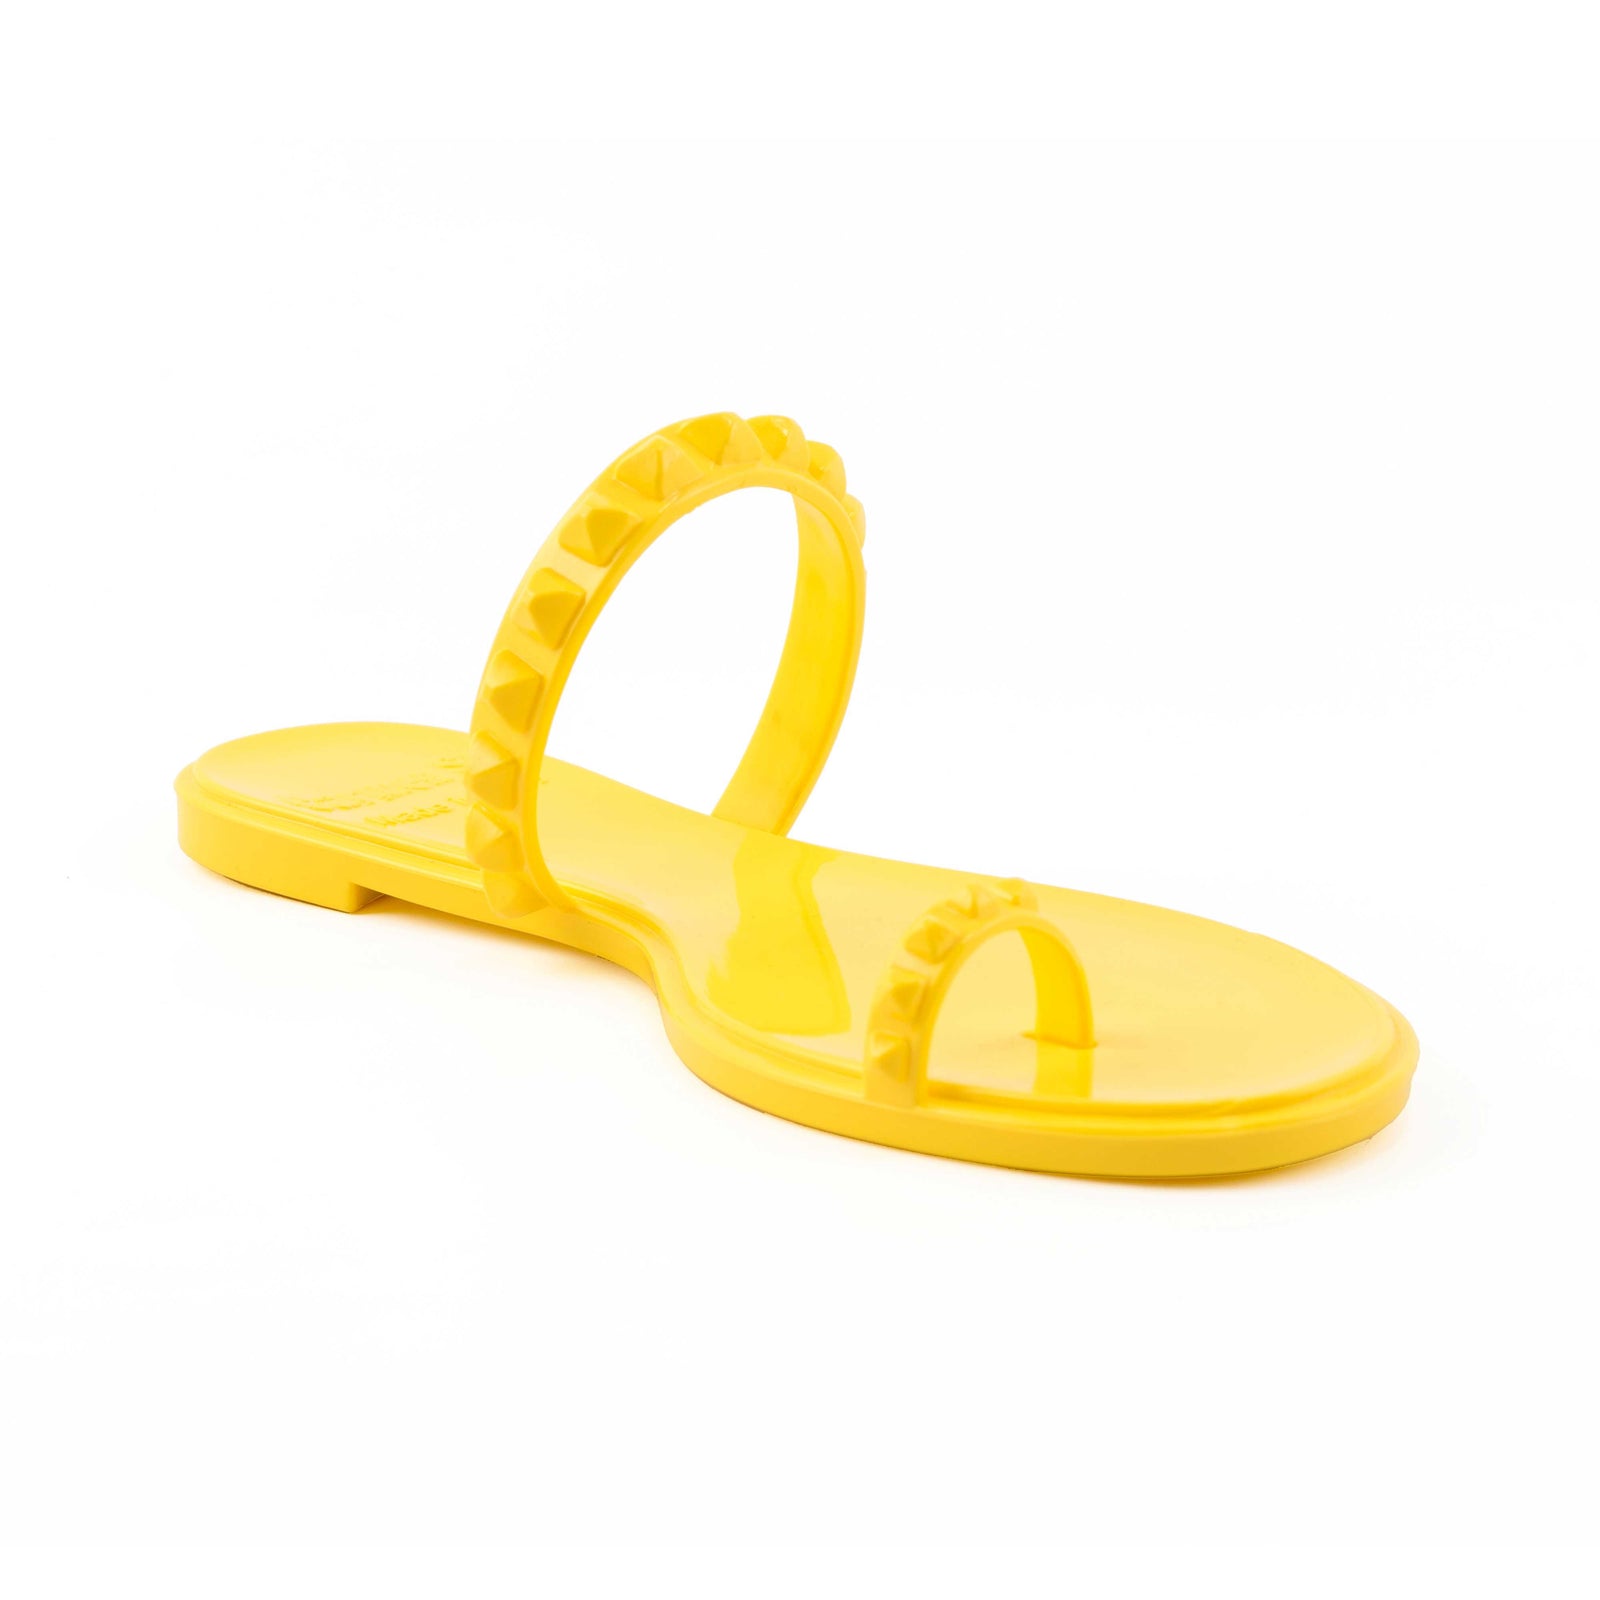 Womens sandals, yellow jelly sandals from Carmen Sol on sale